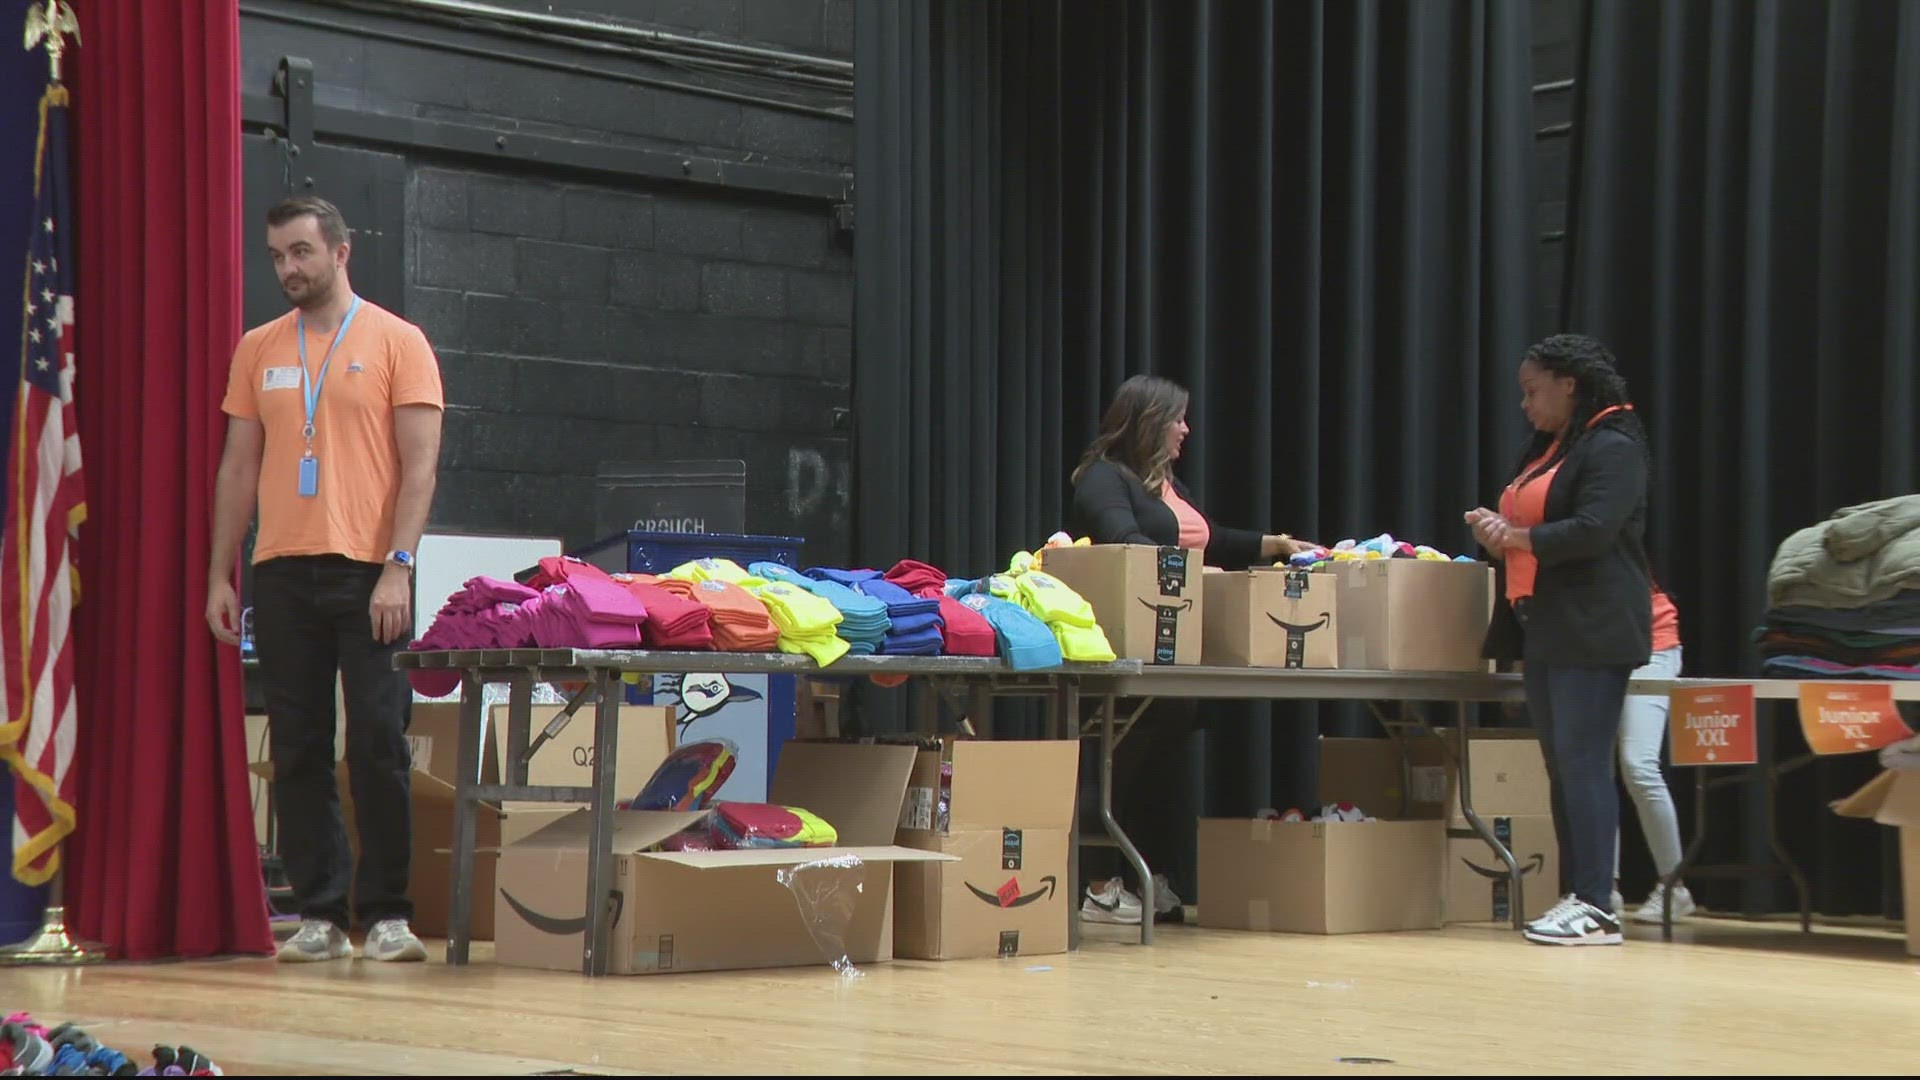 The organization handed out hundreds of coats, gloves and warm clothing.